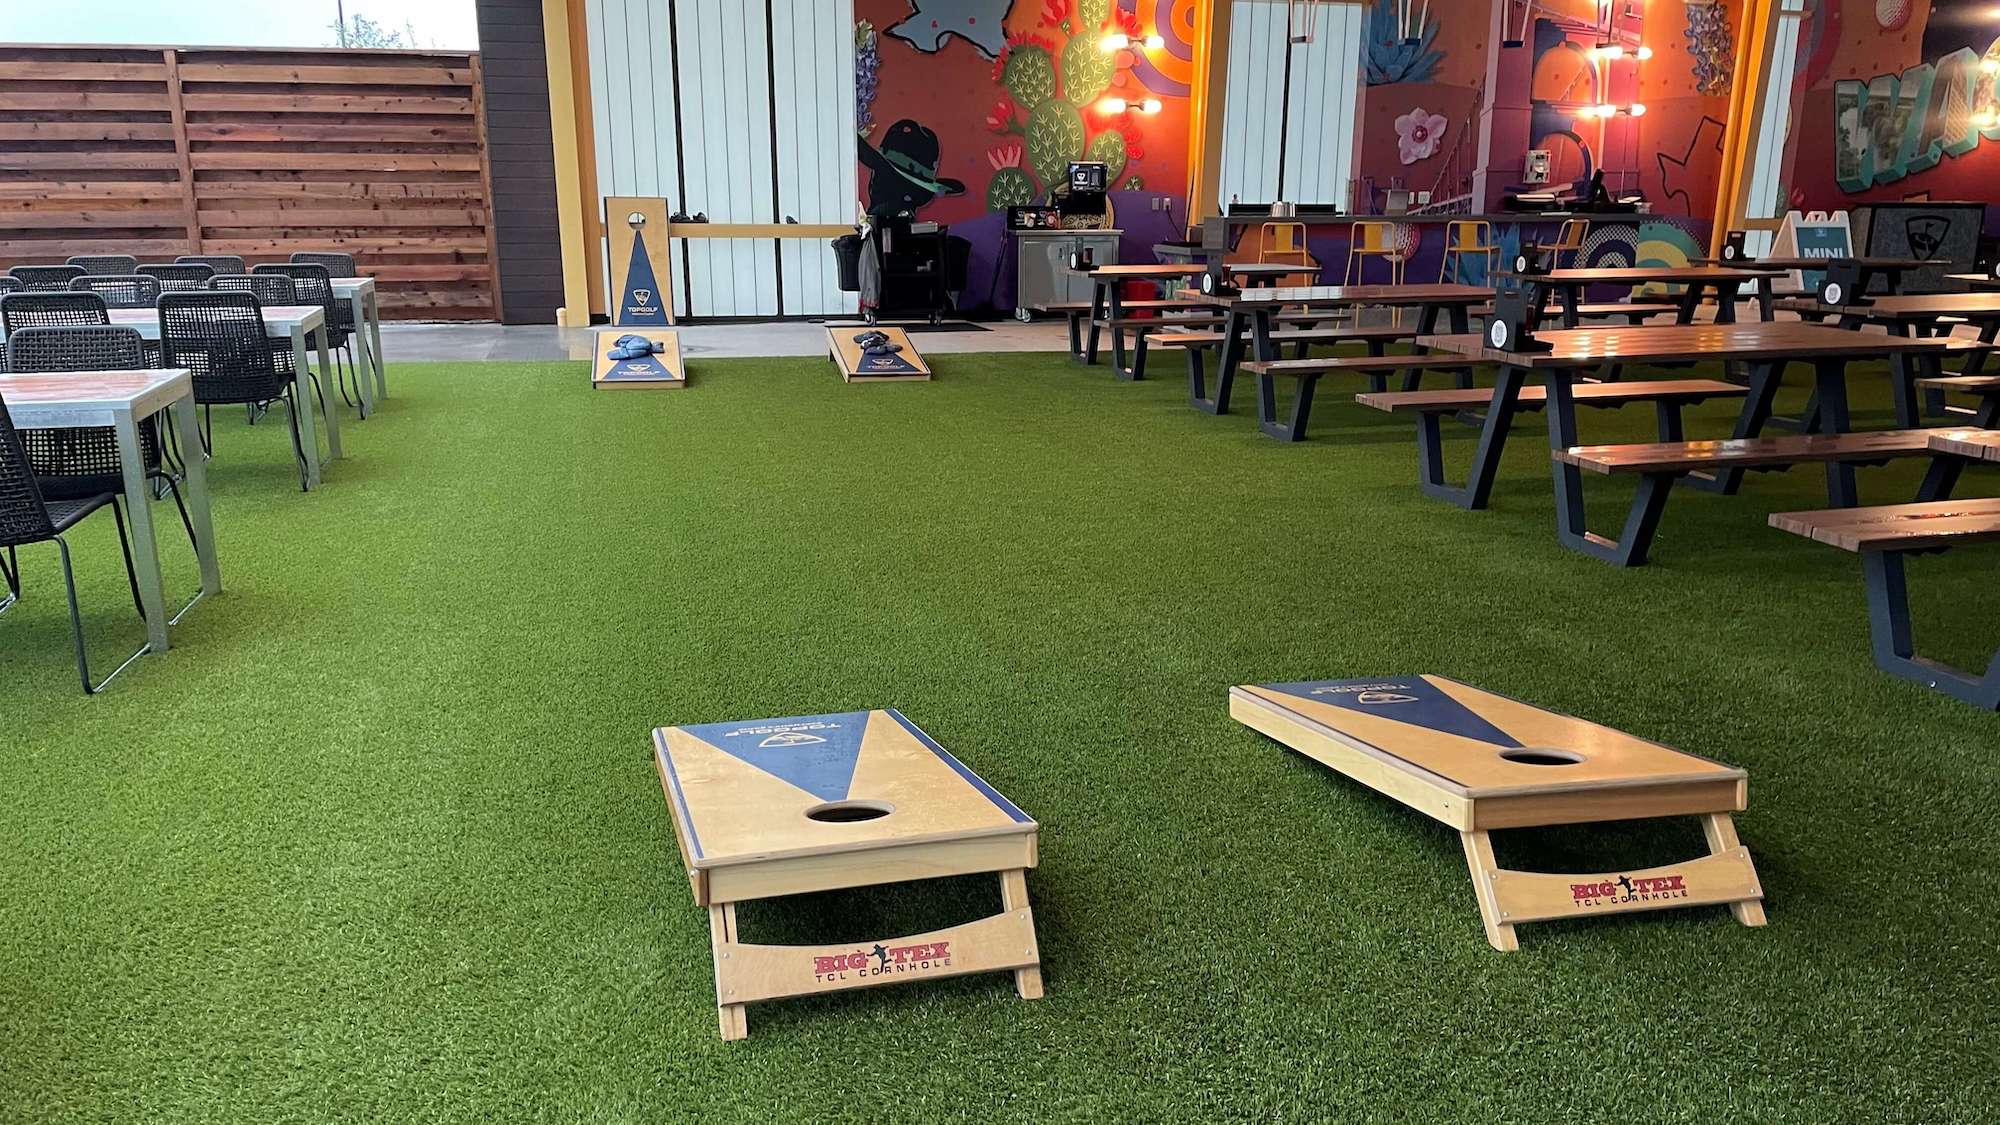 dining area with artificial turf and cornhole